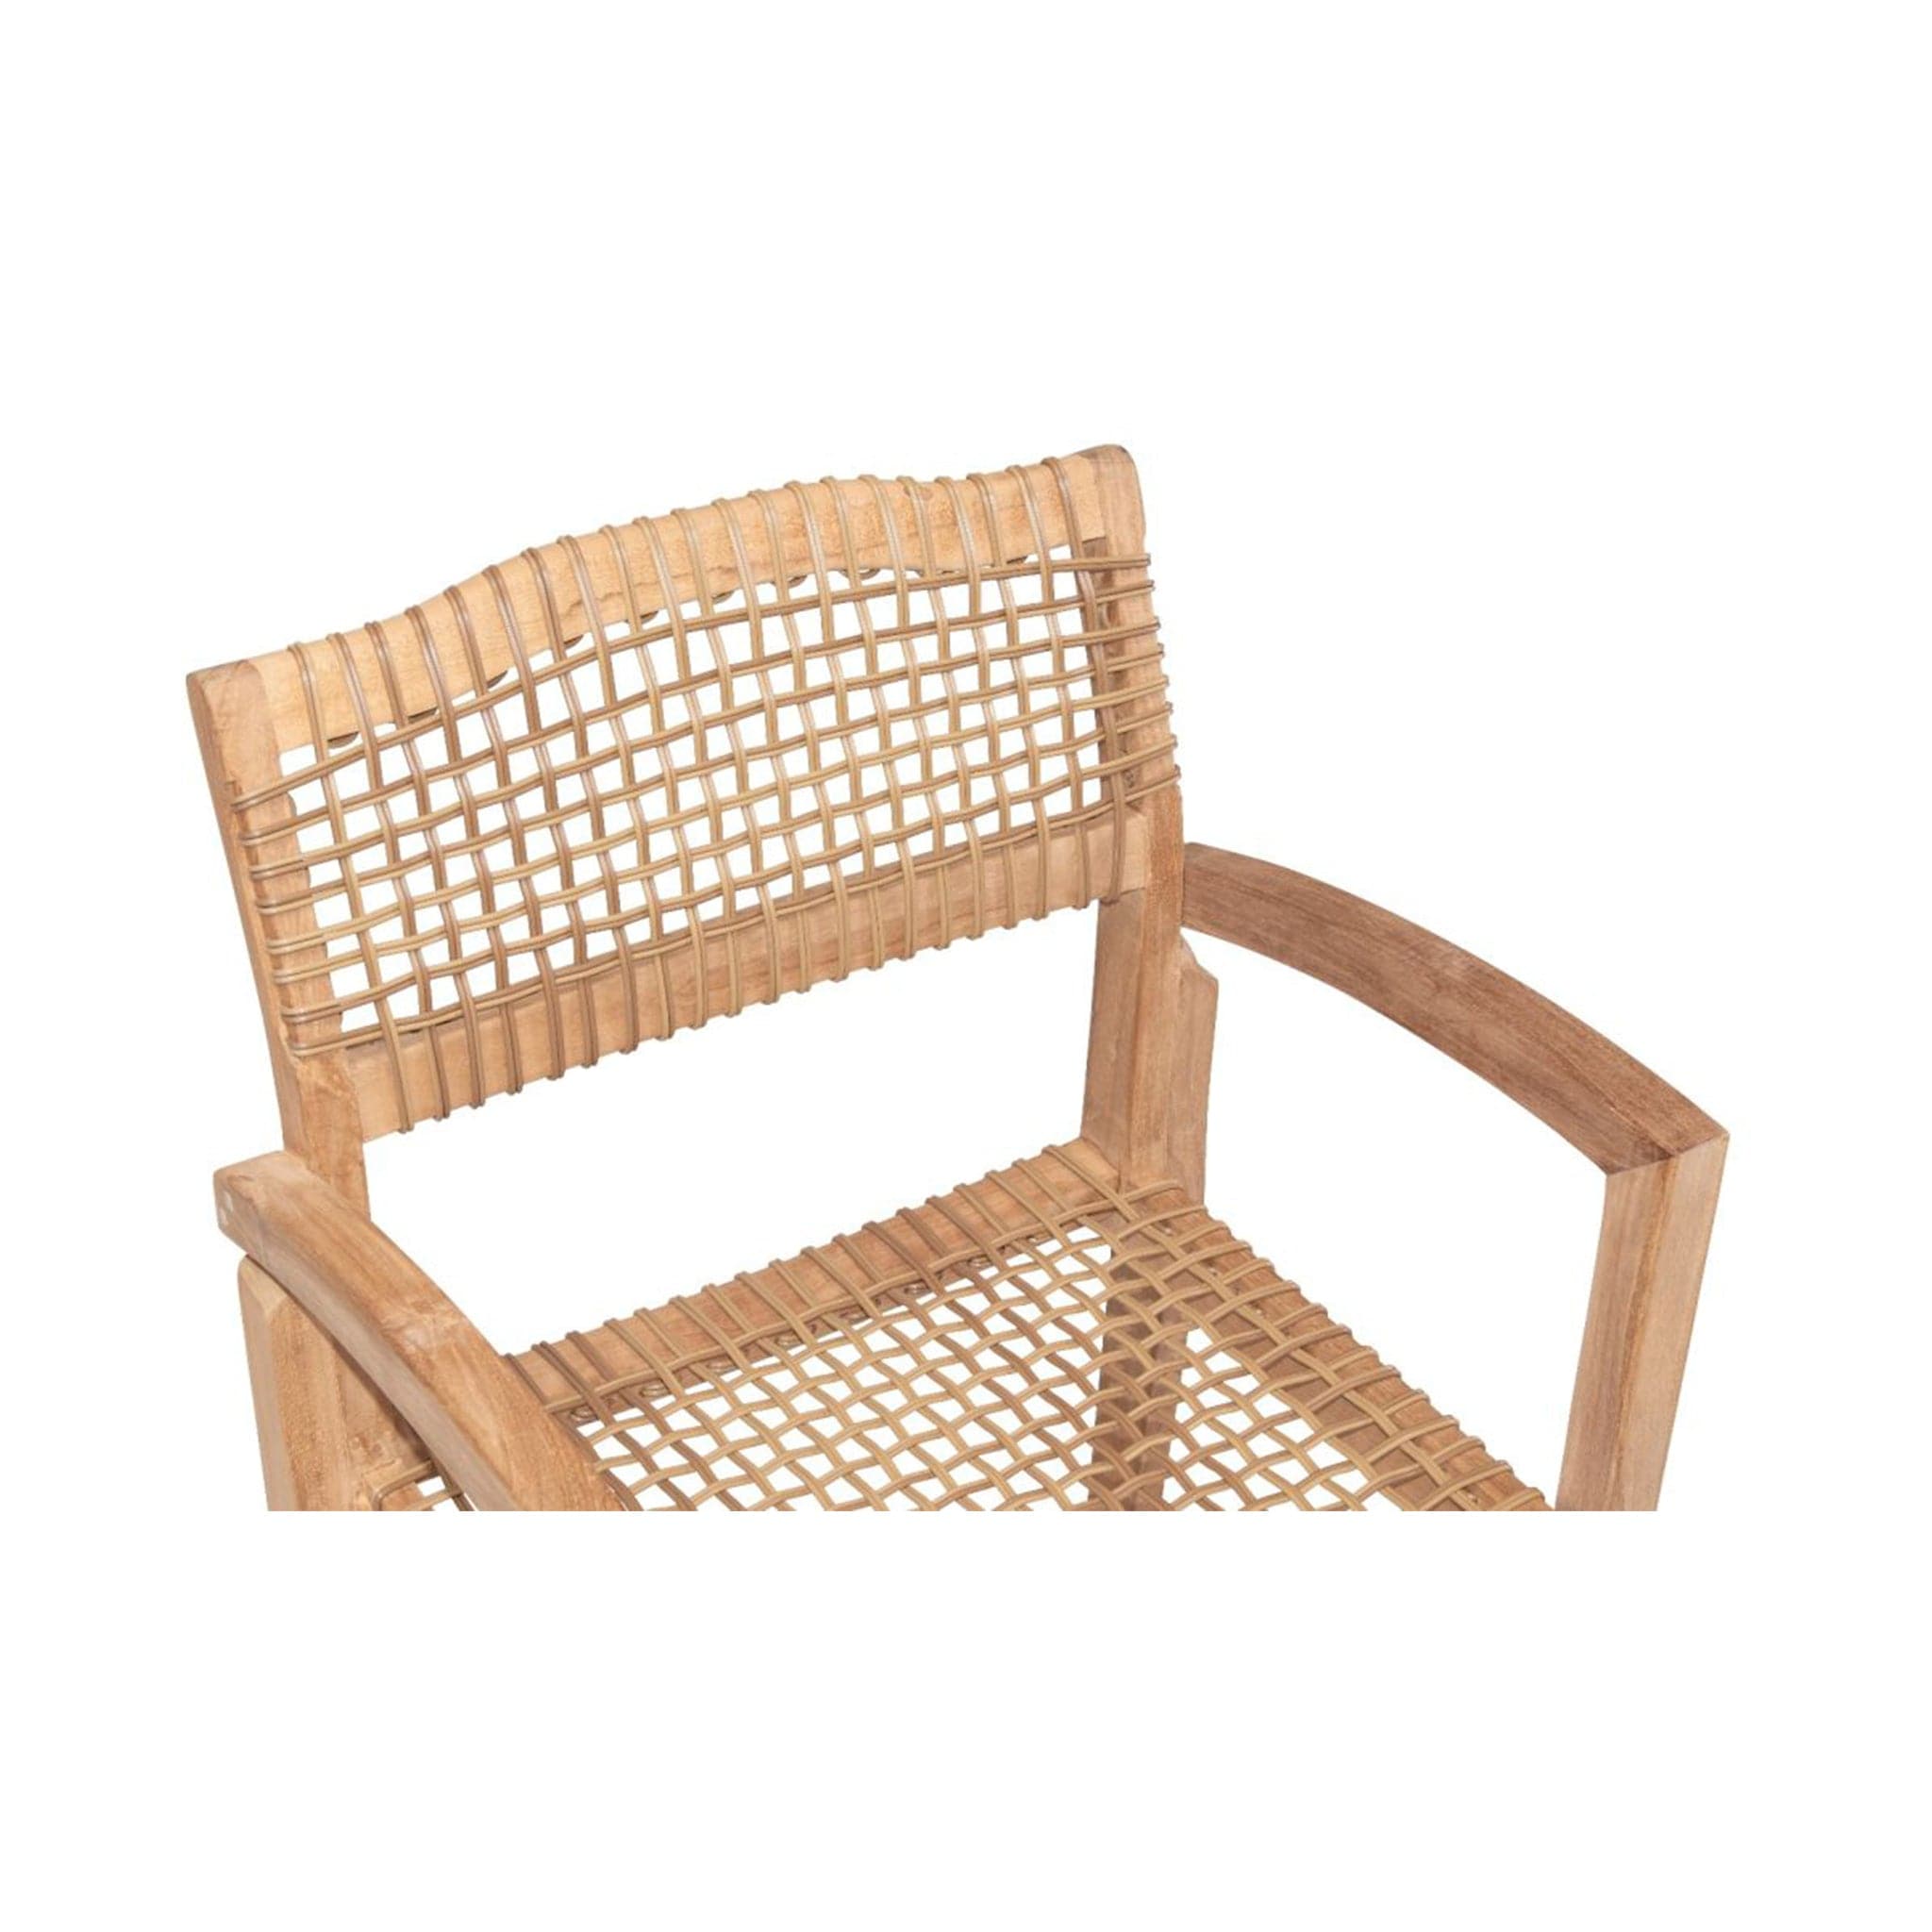 Sands Dining Arm Chair